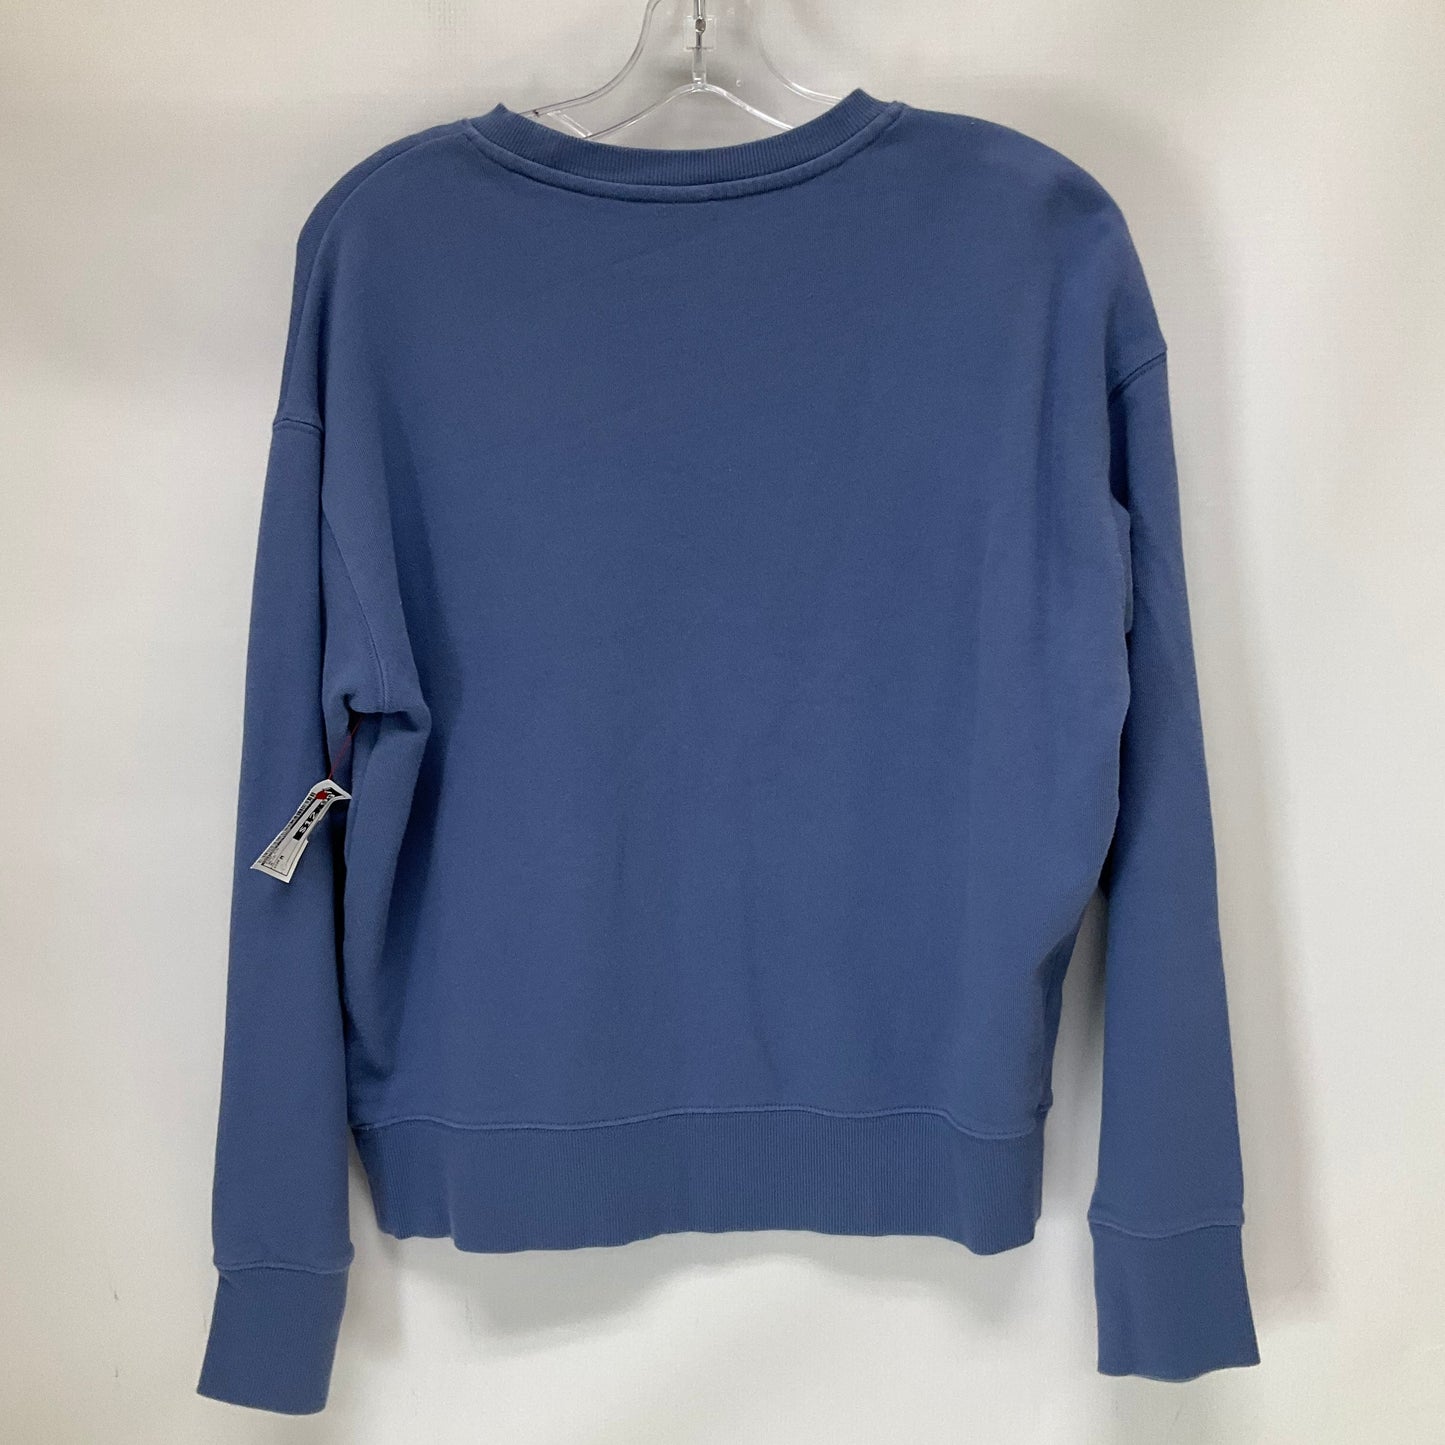 Top Long Sleeve By Disney Store  Size: M